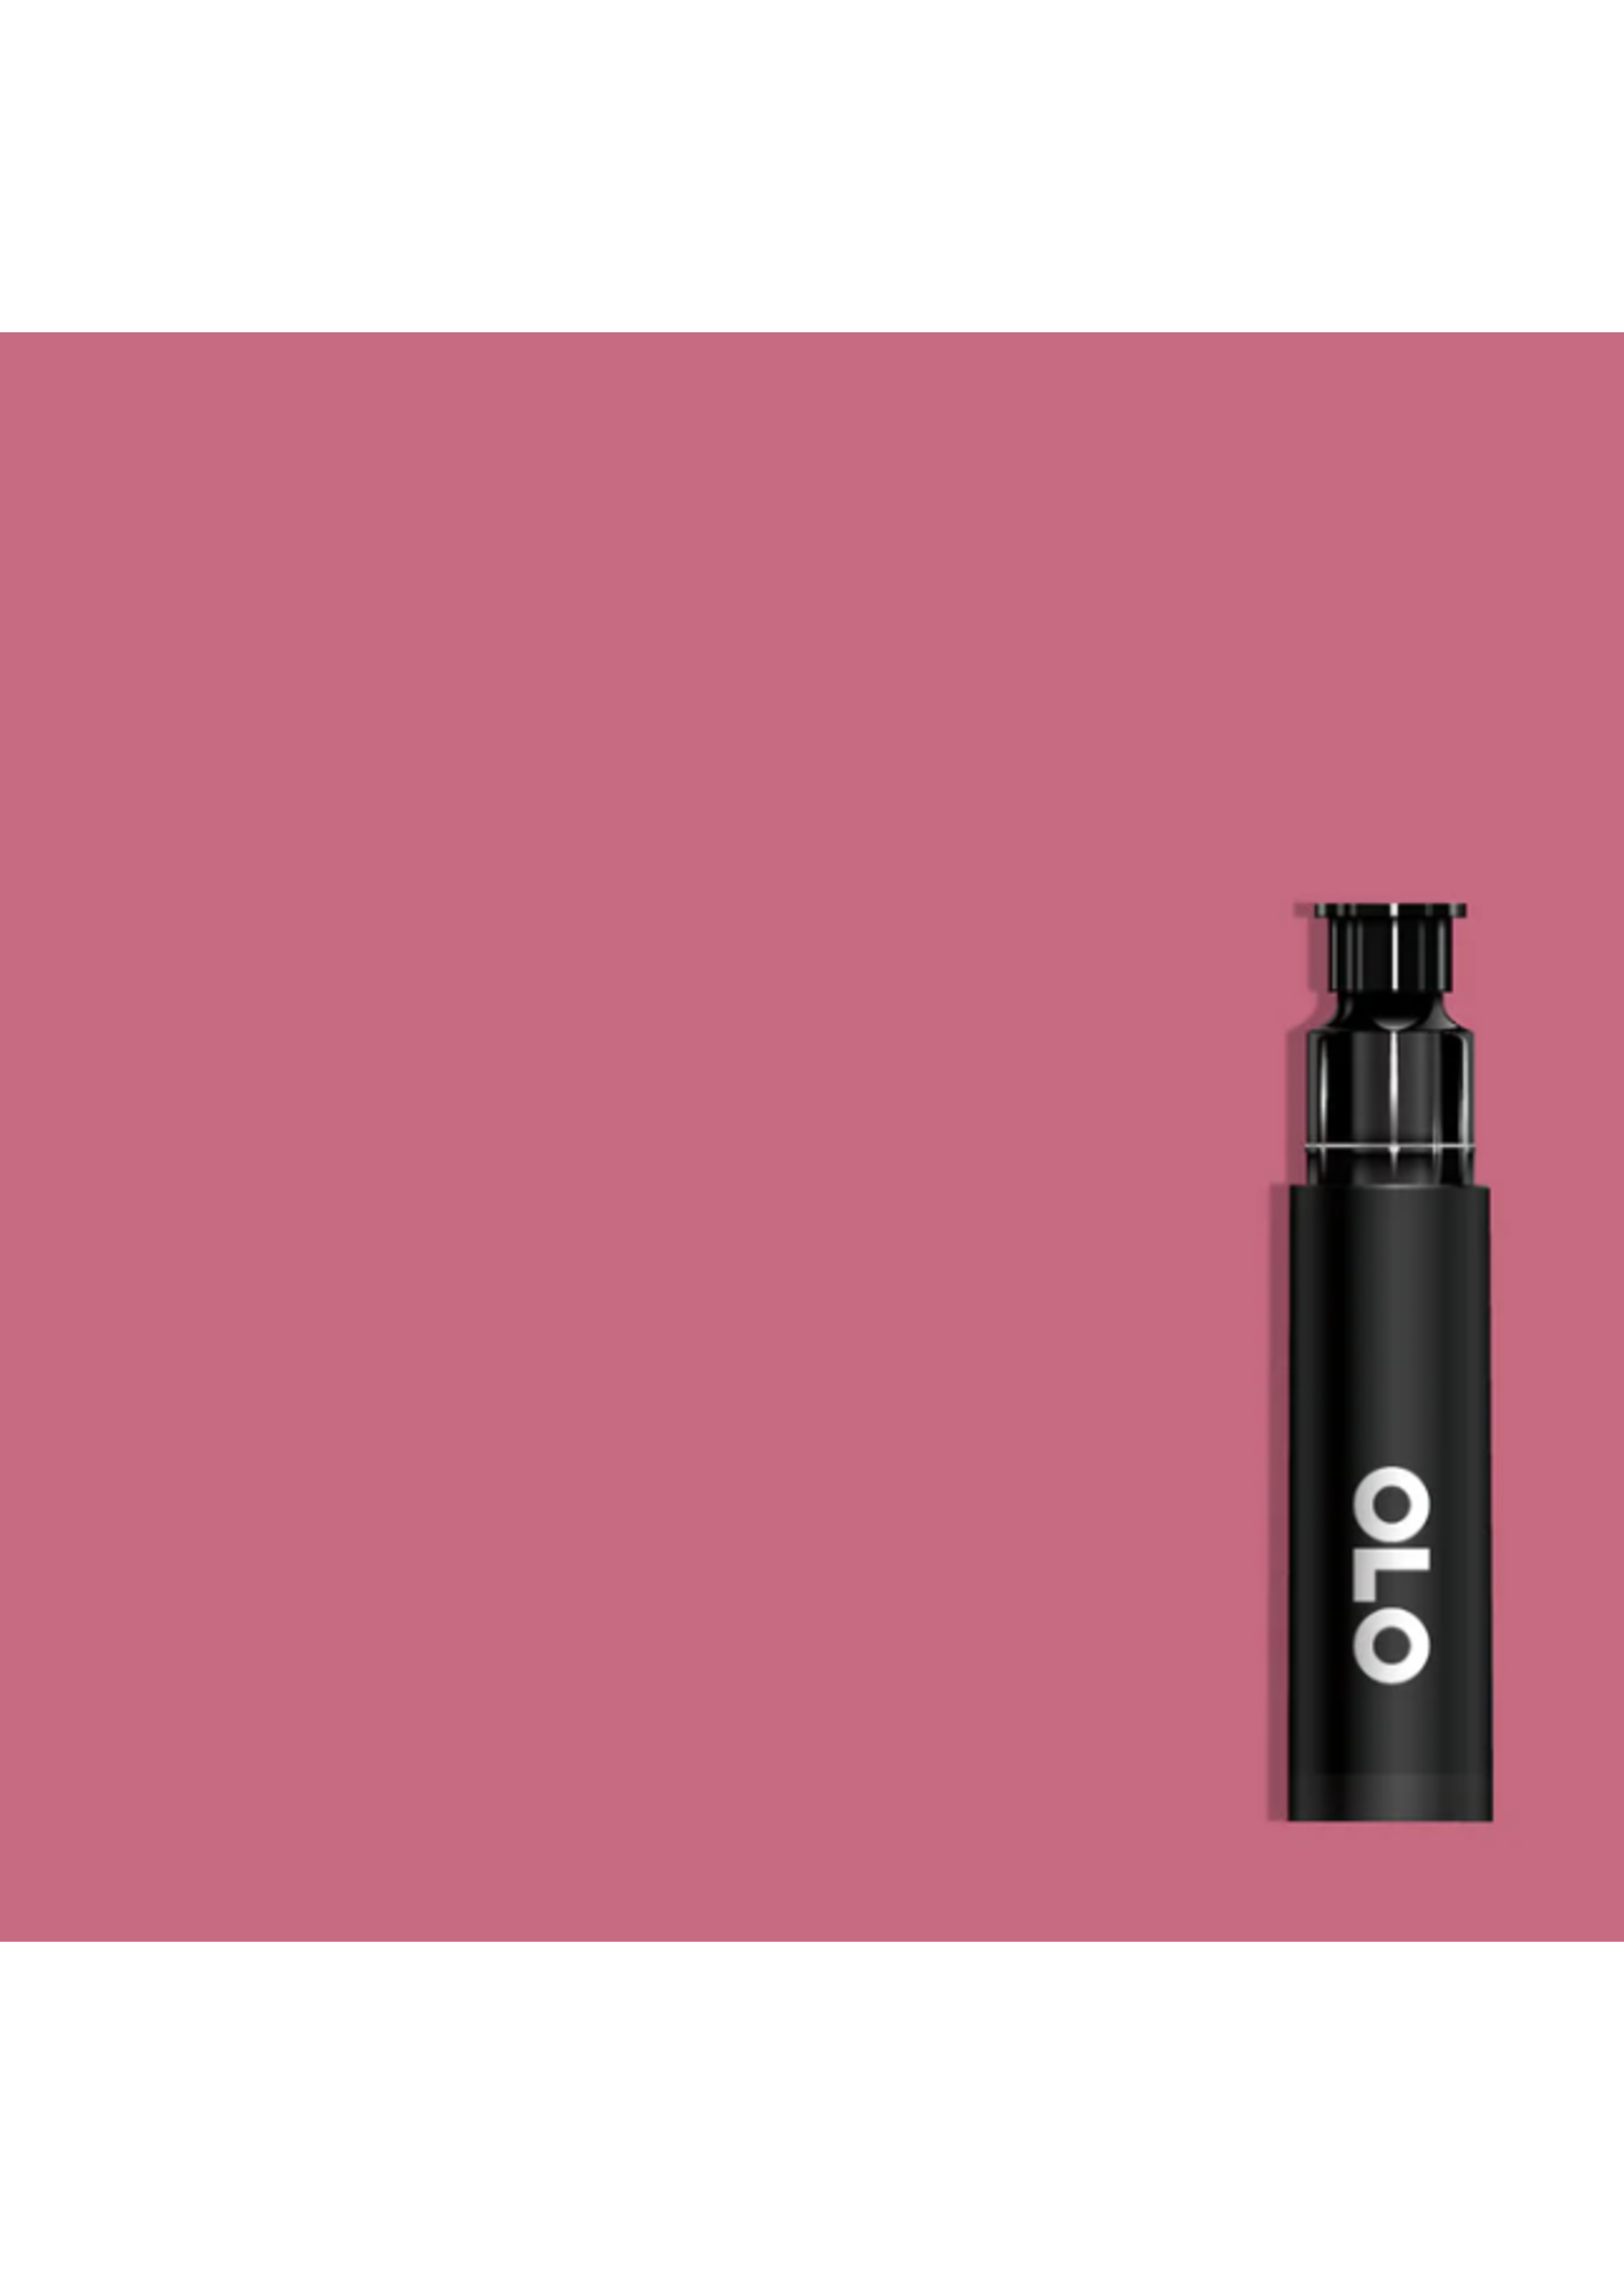 OLO OLO Brush Replacement Cartridge: Dusty Rose